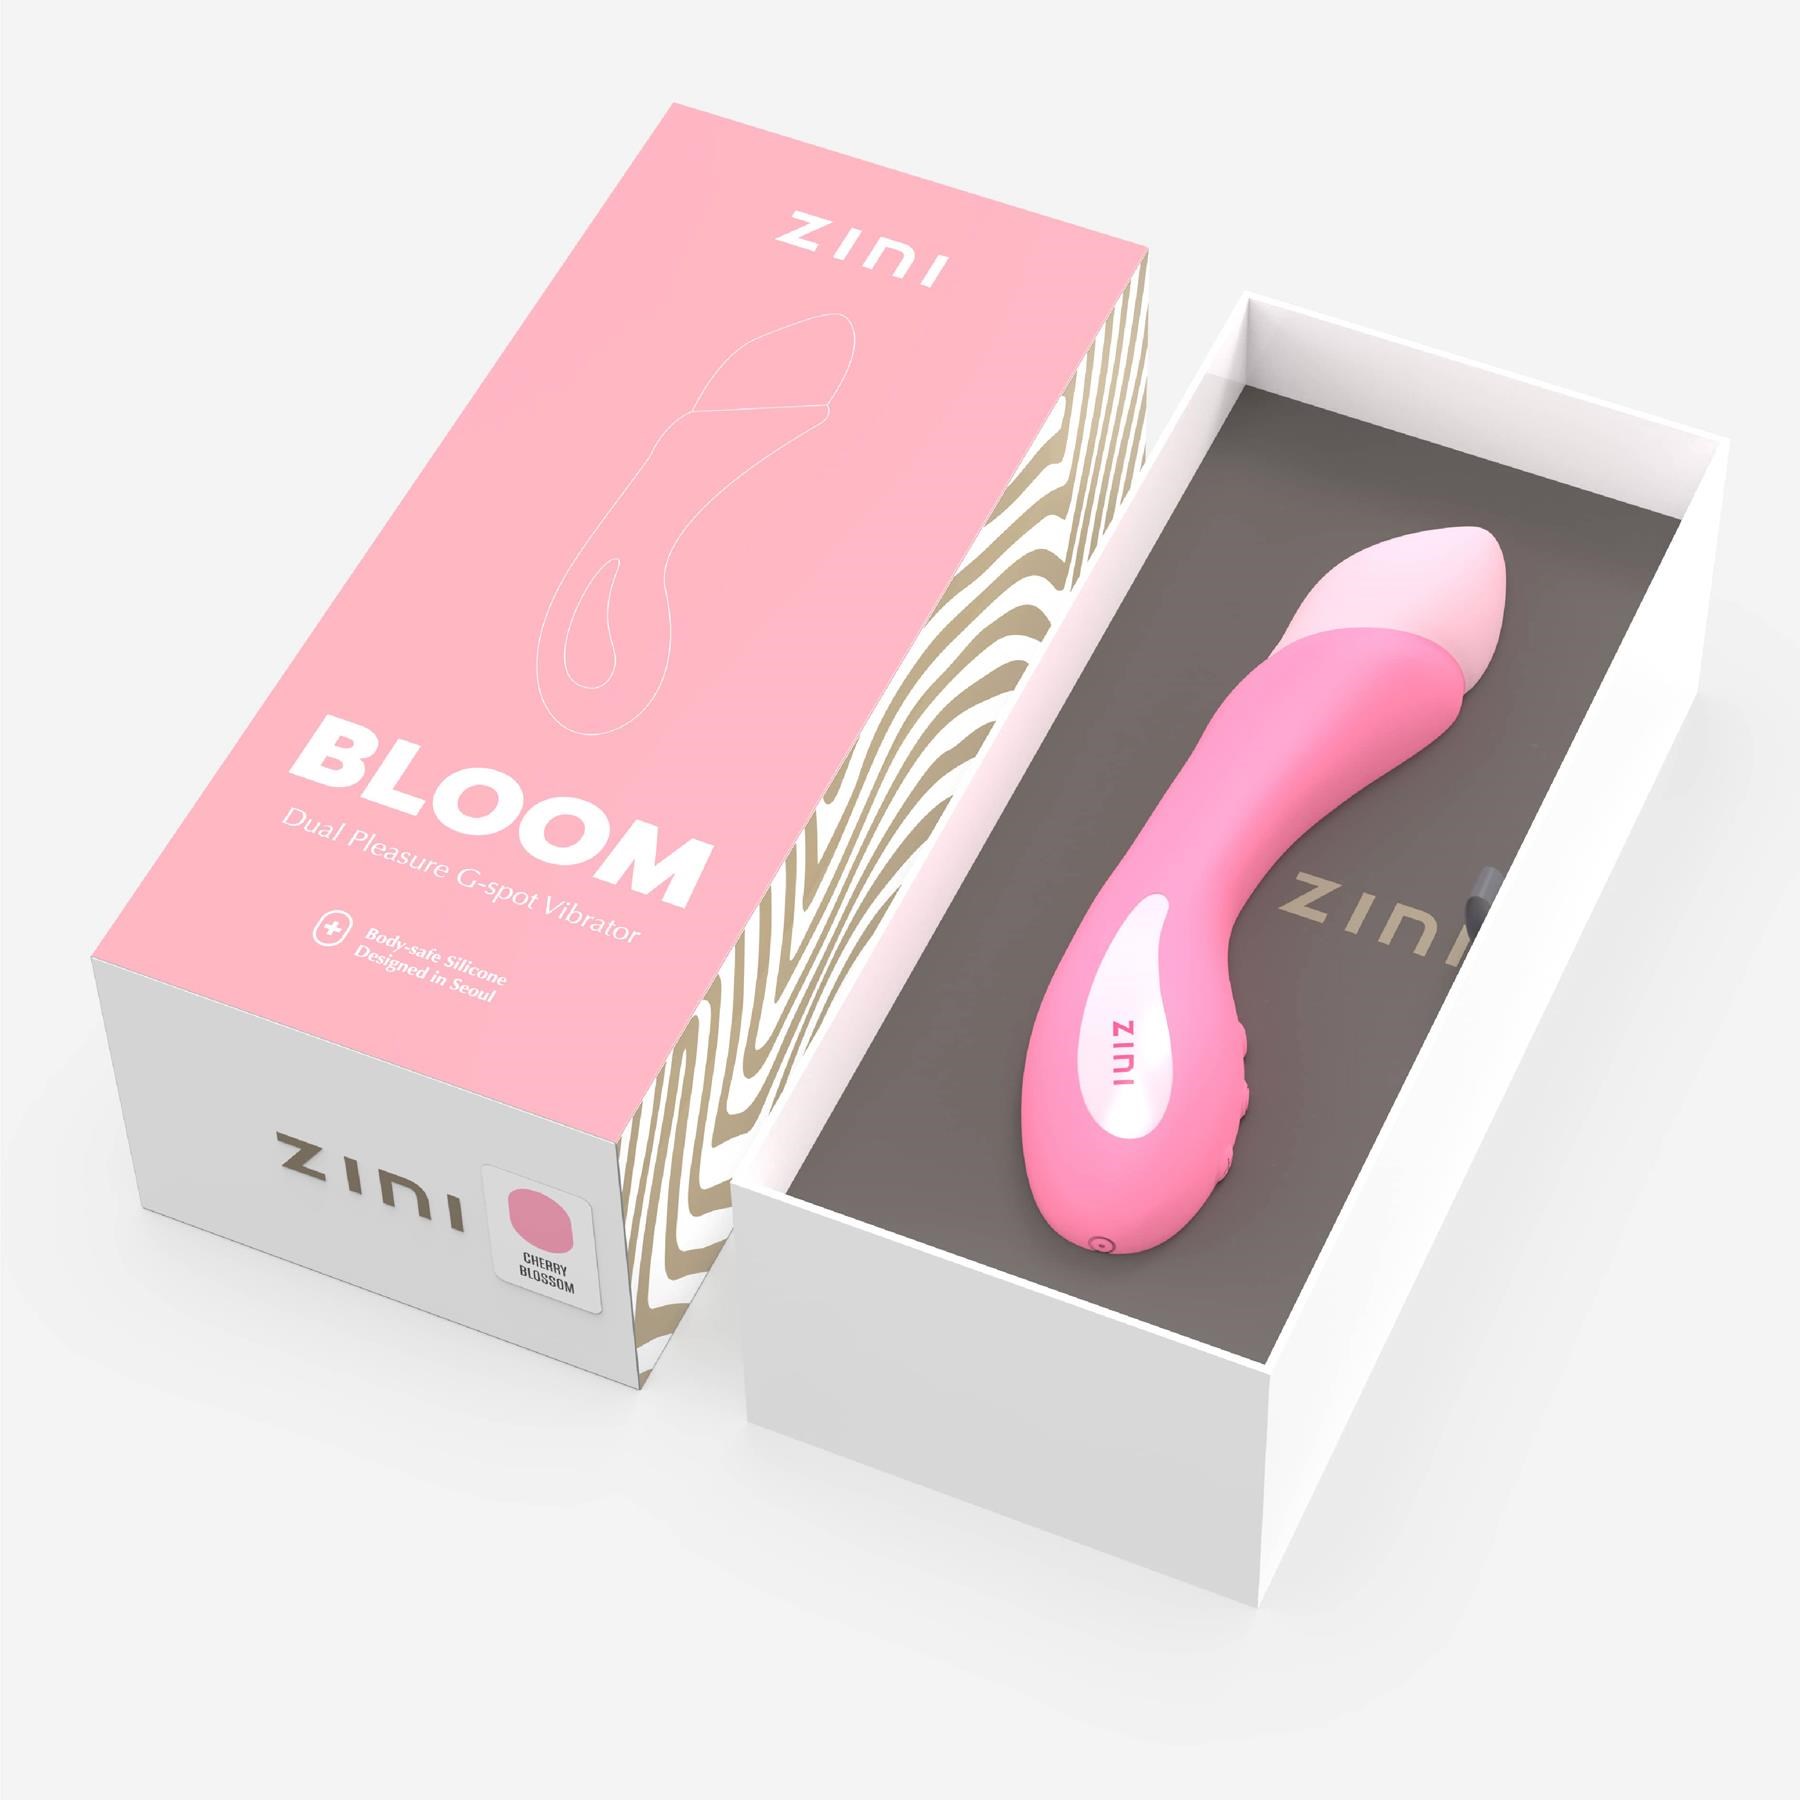 Zini Bloom G-Spot Massager - Open Packaging - Showing Product